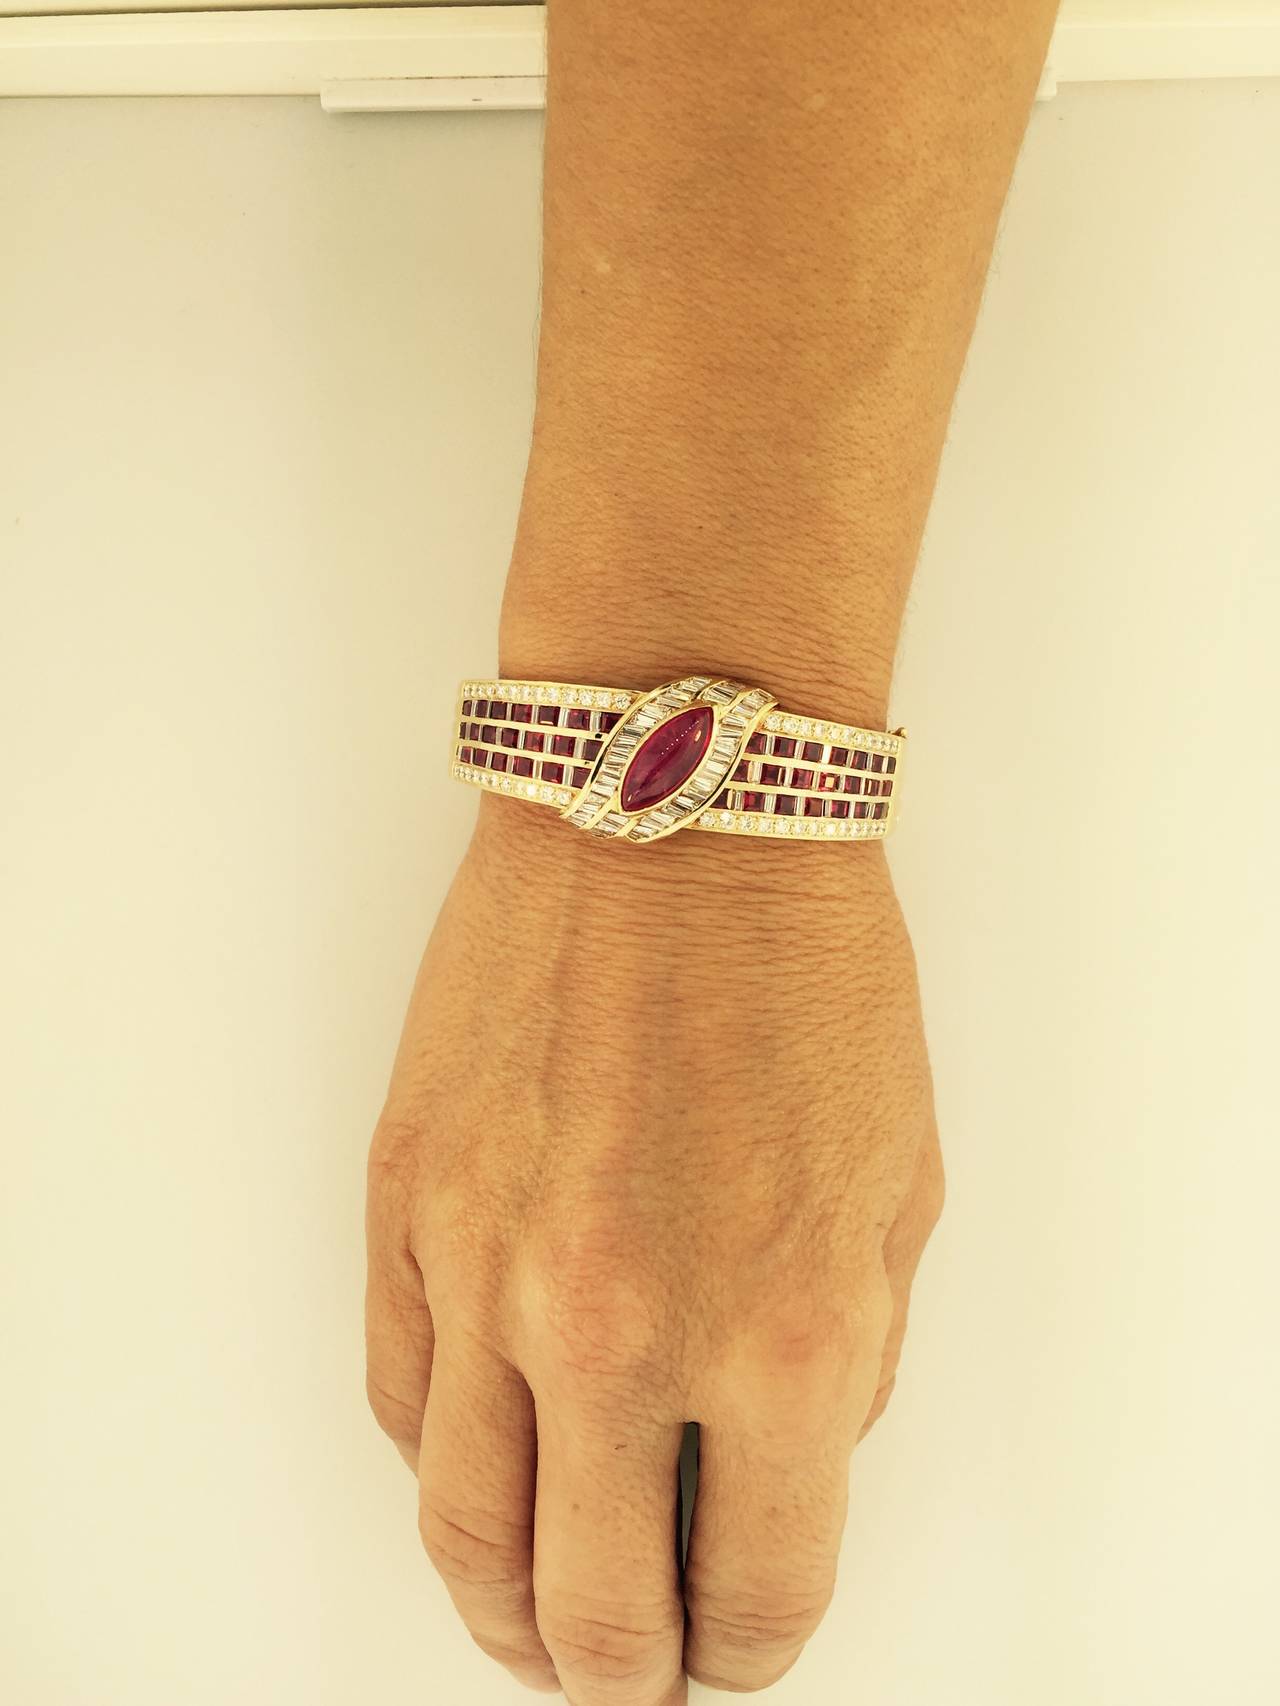 A Marquise Burmese cabochon ruby 3ct estimated set atop a wide 18k yellow gold bangle bracelet. GIA report #2161204998  No indication of heating.
Numerous diamonds and square cut Burma rubies, pave and channel set.
Estimated: 5ct total weight of